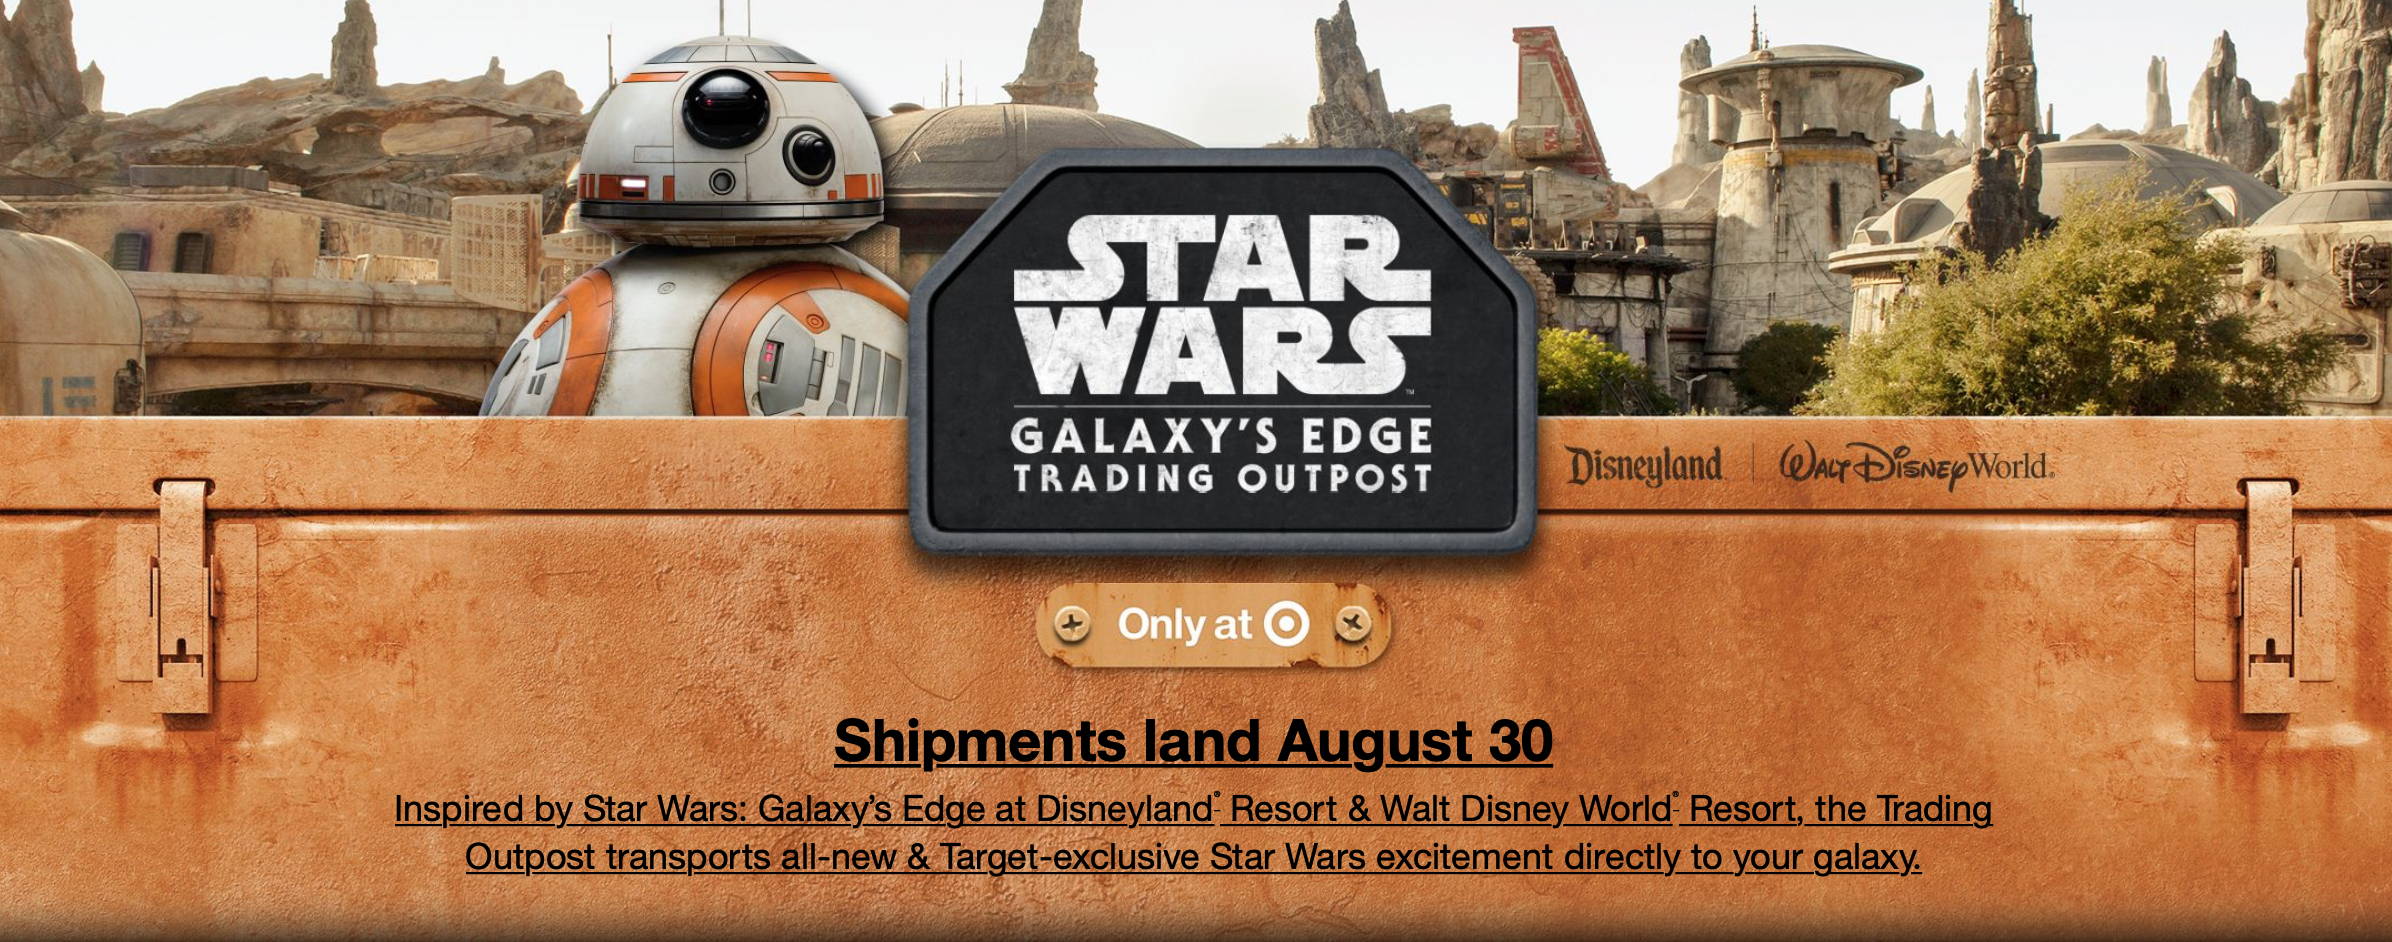 Choose Your Astromech Droid & BB Units Star Wars Galaxy's Edge Trading Outpost 